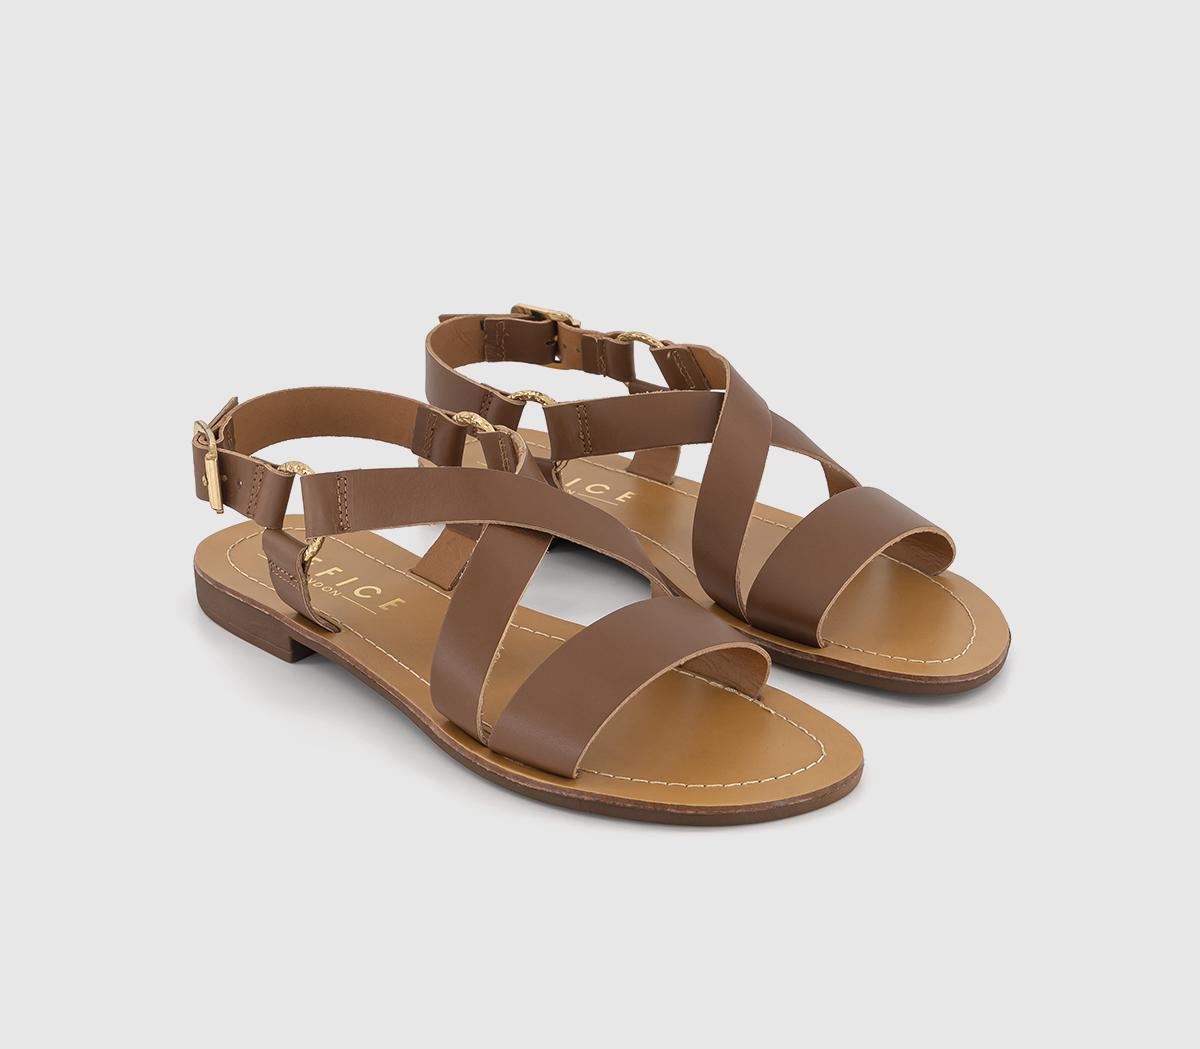 OFFICE Womens Sequence Cross Over Flat Sandals Tan Leather, 6